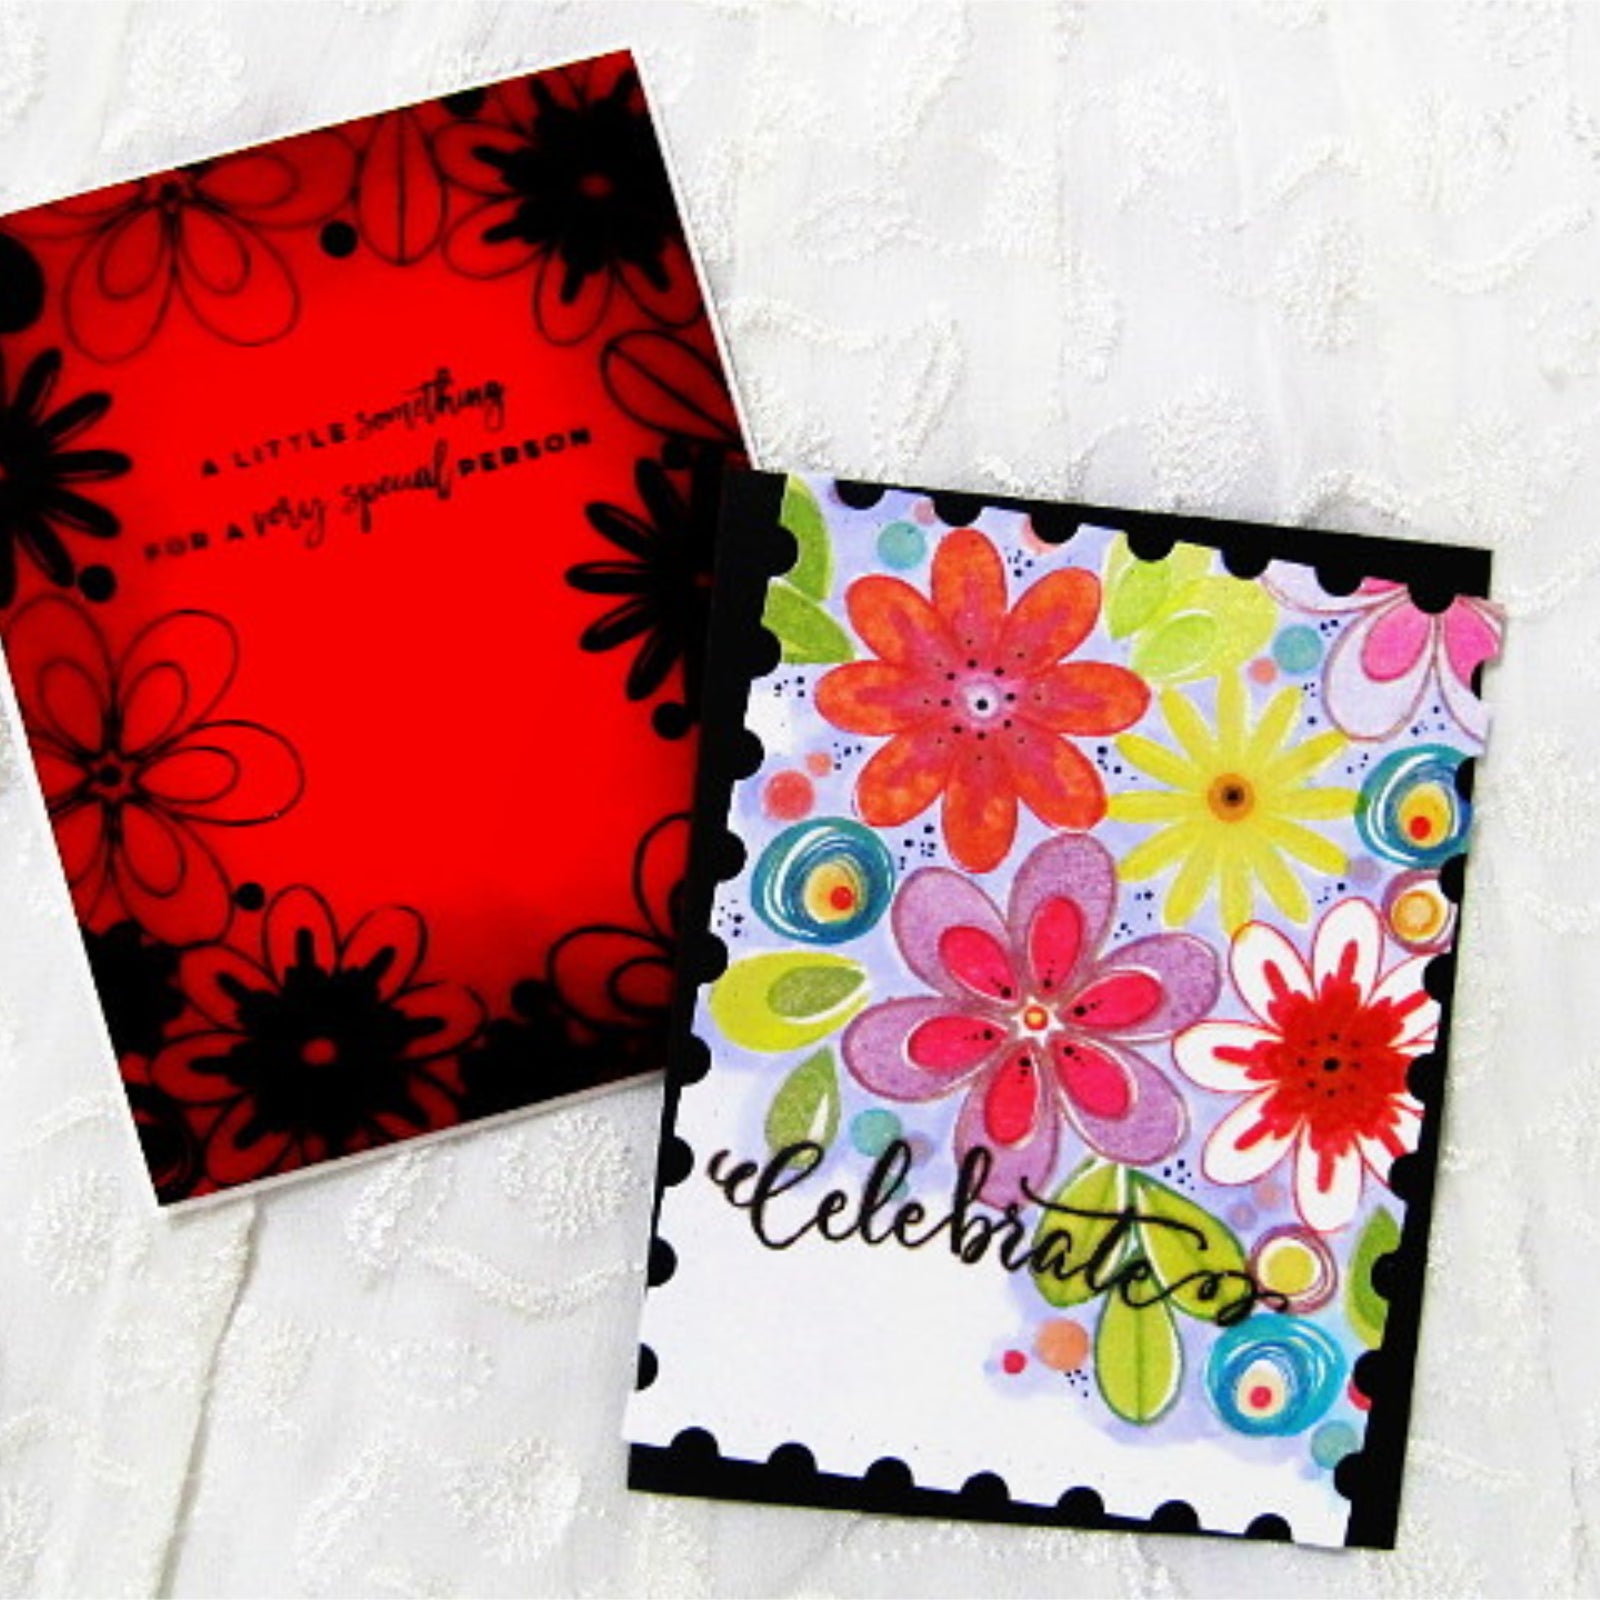 Postage Stamp Backgrounds w Labels/Tags Cutting & Embossing Dies